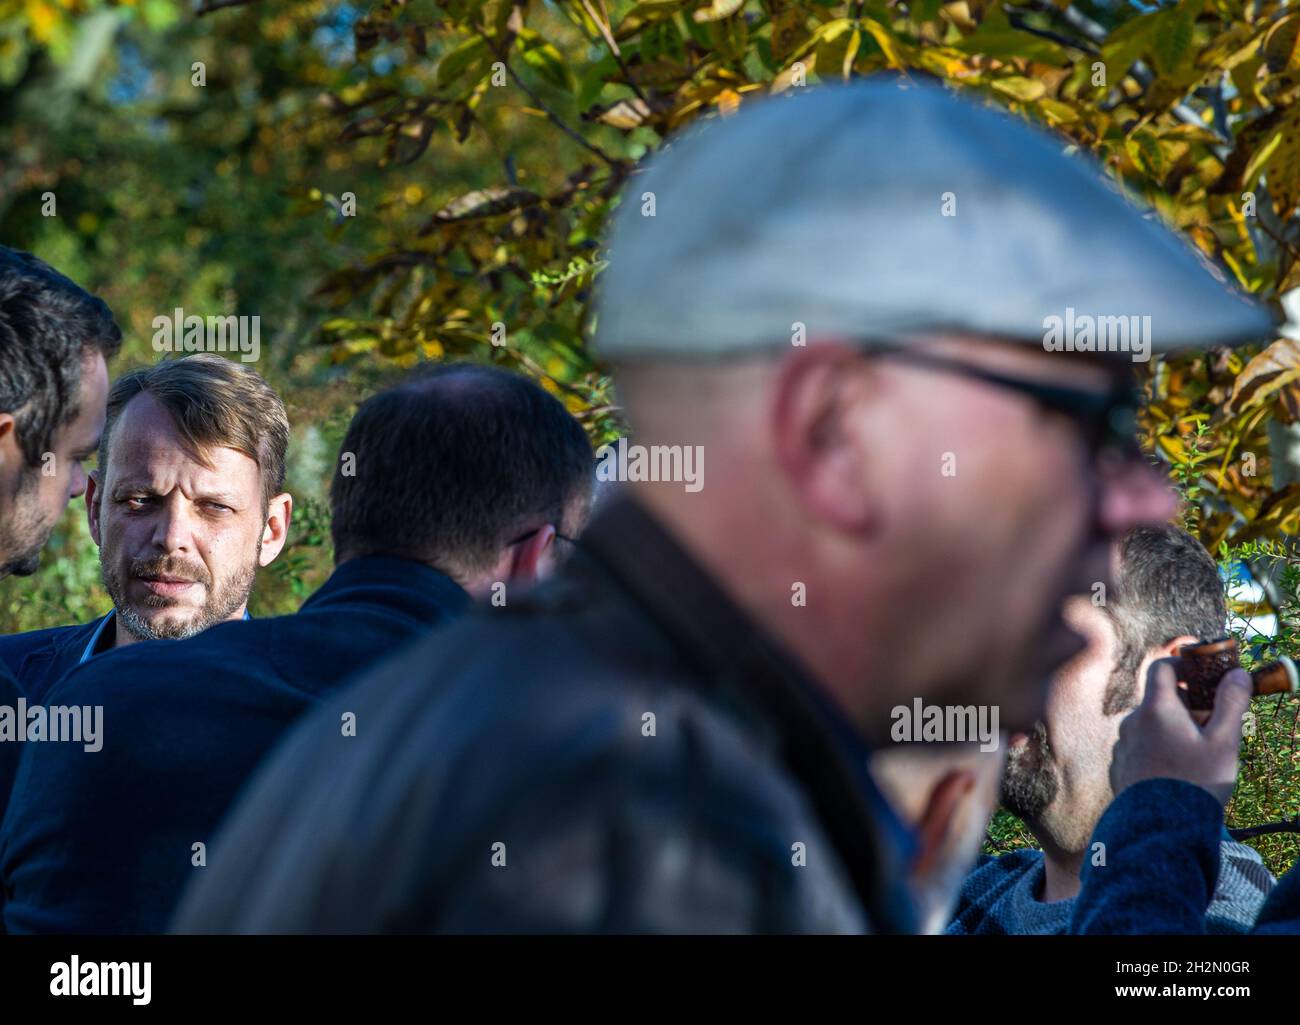 Western Pomerania, Germany. 23rd Oct, 2021. Western Pomerania, Germany. 23rd Oct, 2021. 23 October 2021, Mecklenburg-Western Pomerania, Grevesmühlen: Nikolaus Kramer (back), parliamentary group leader of the AfD in the state parliament of Mecklenburg-Western Pomerania, watches AfD member Thomas Kerl (front) in front of the conference building before the start of the AfD state party conference. Kerl had published a video on his Facebook page claiming that there were rumors of 'wildest parties' in rooms of the AfD faction in the state parliament and in the plenary hall. The AfD Mecklenburg-Weste Stock Photo